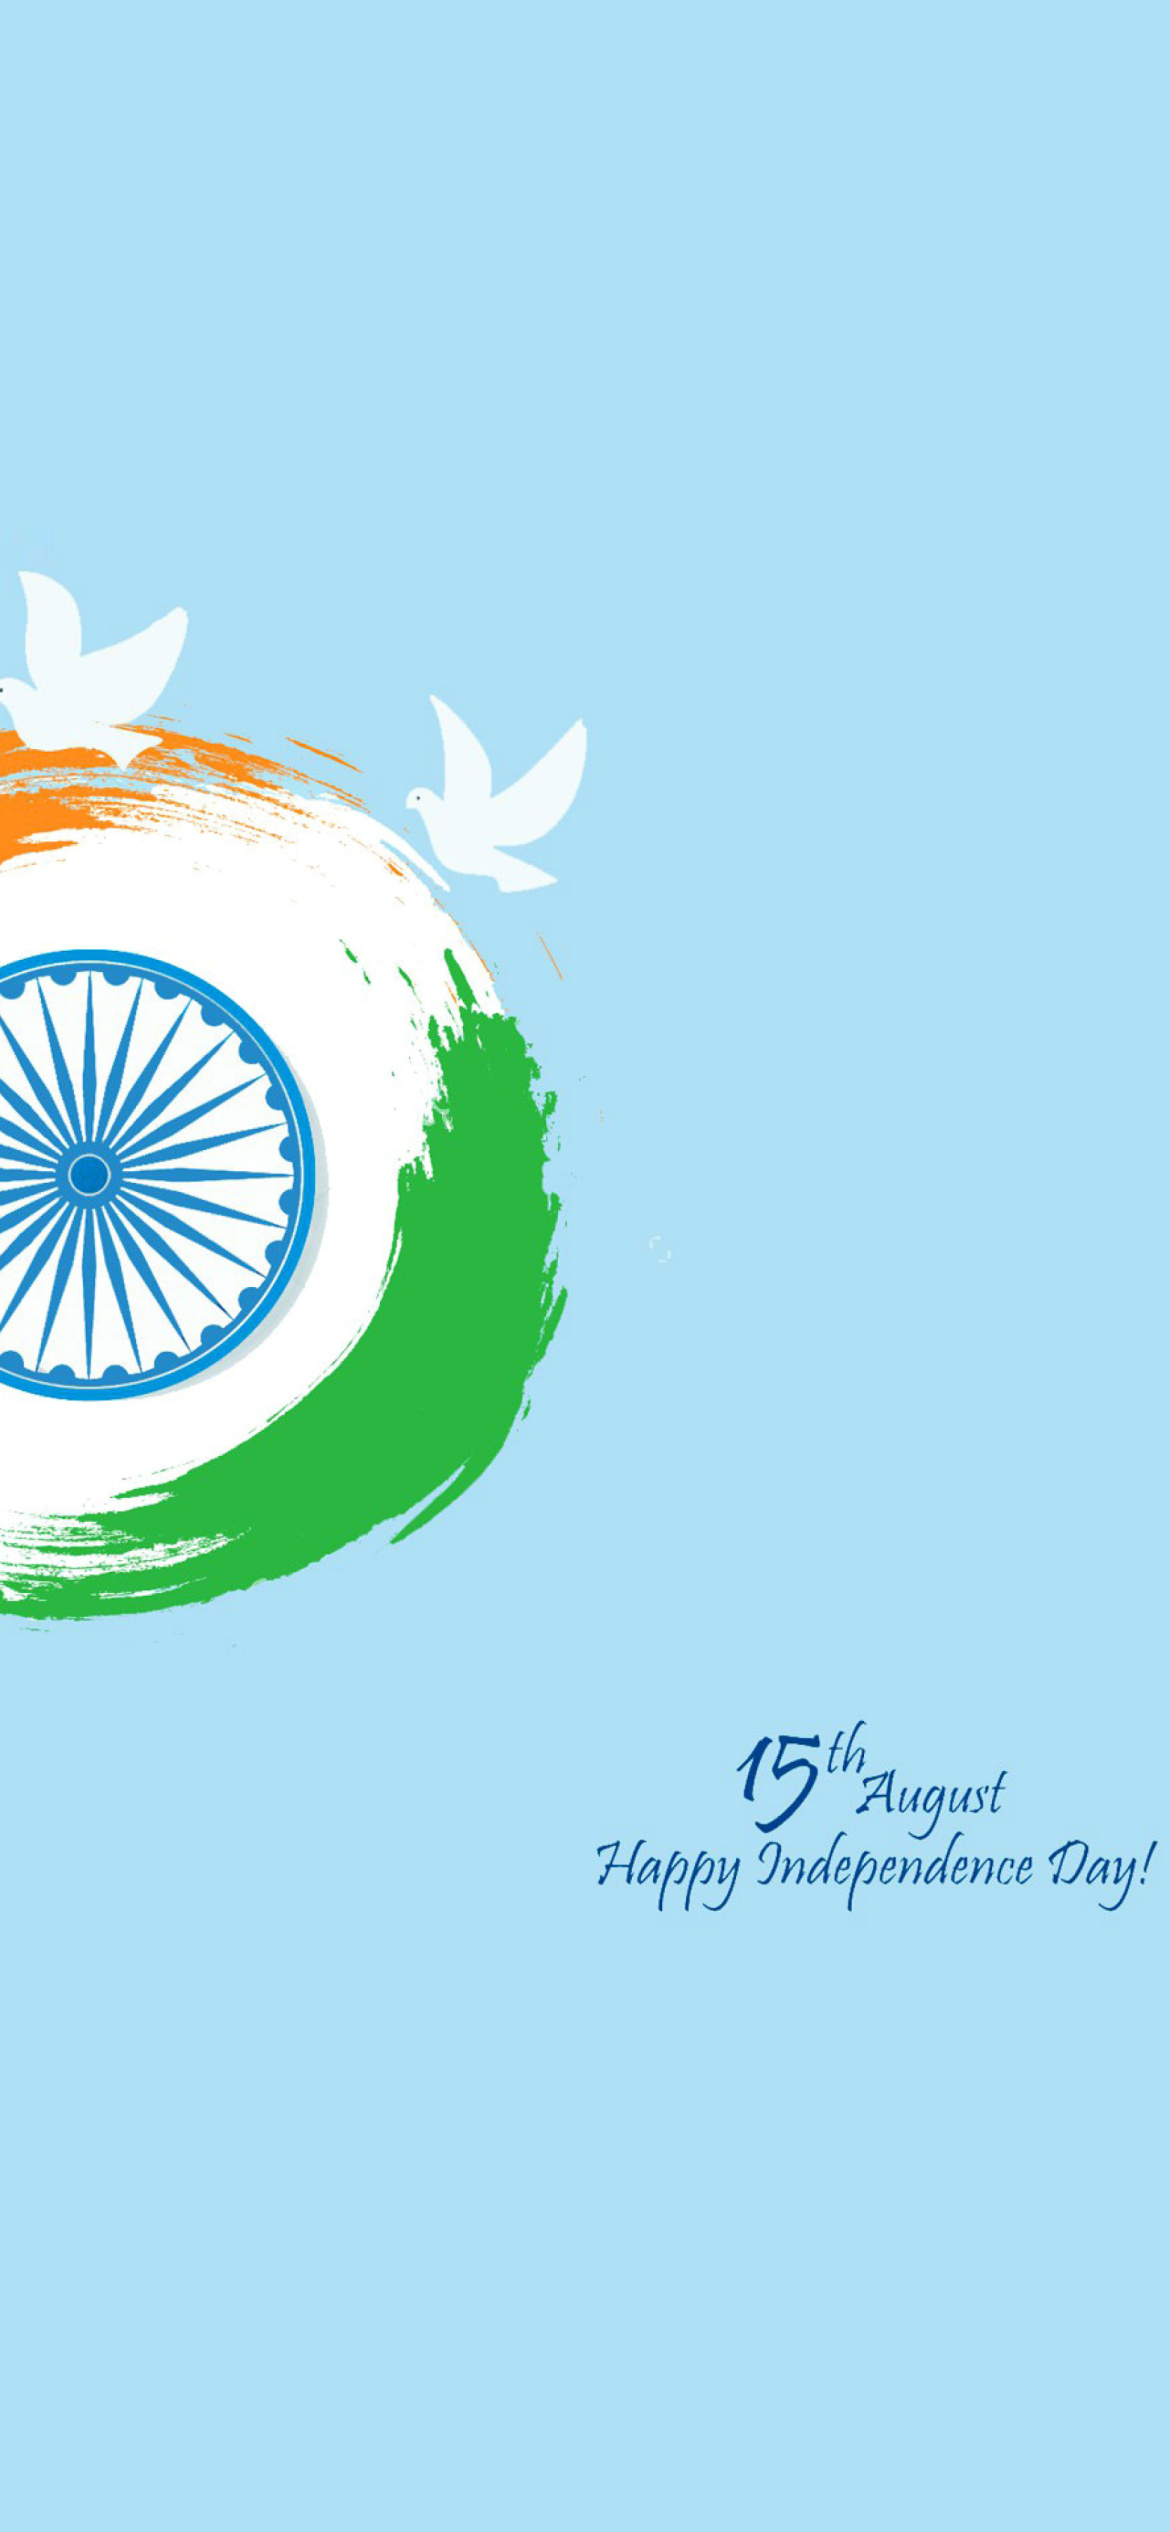 15th August Indian Independence Day wallpaper 1170x2532